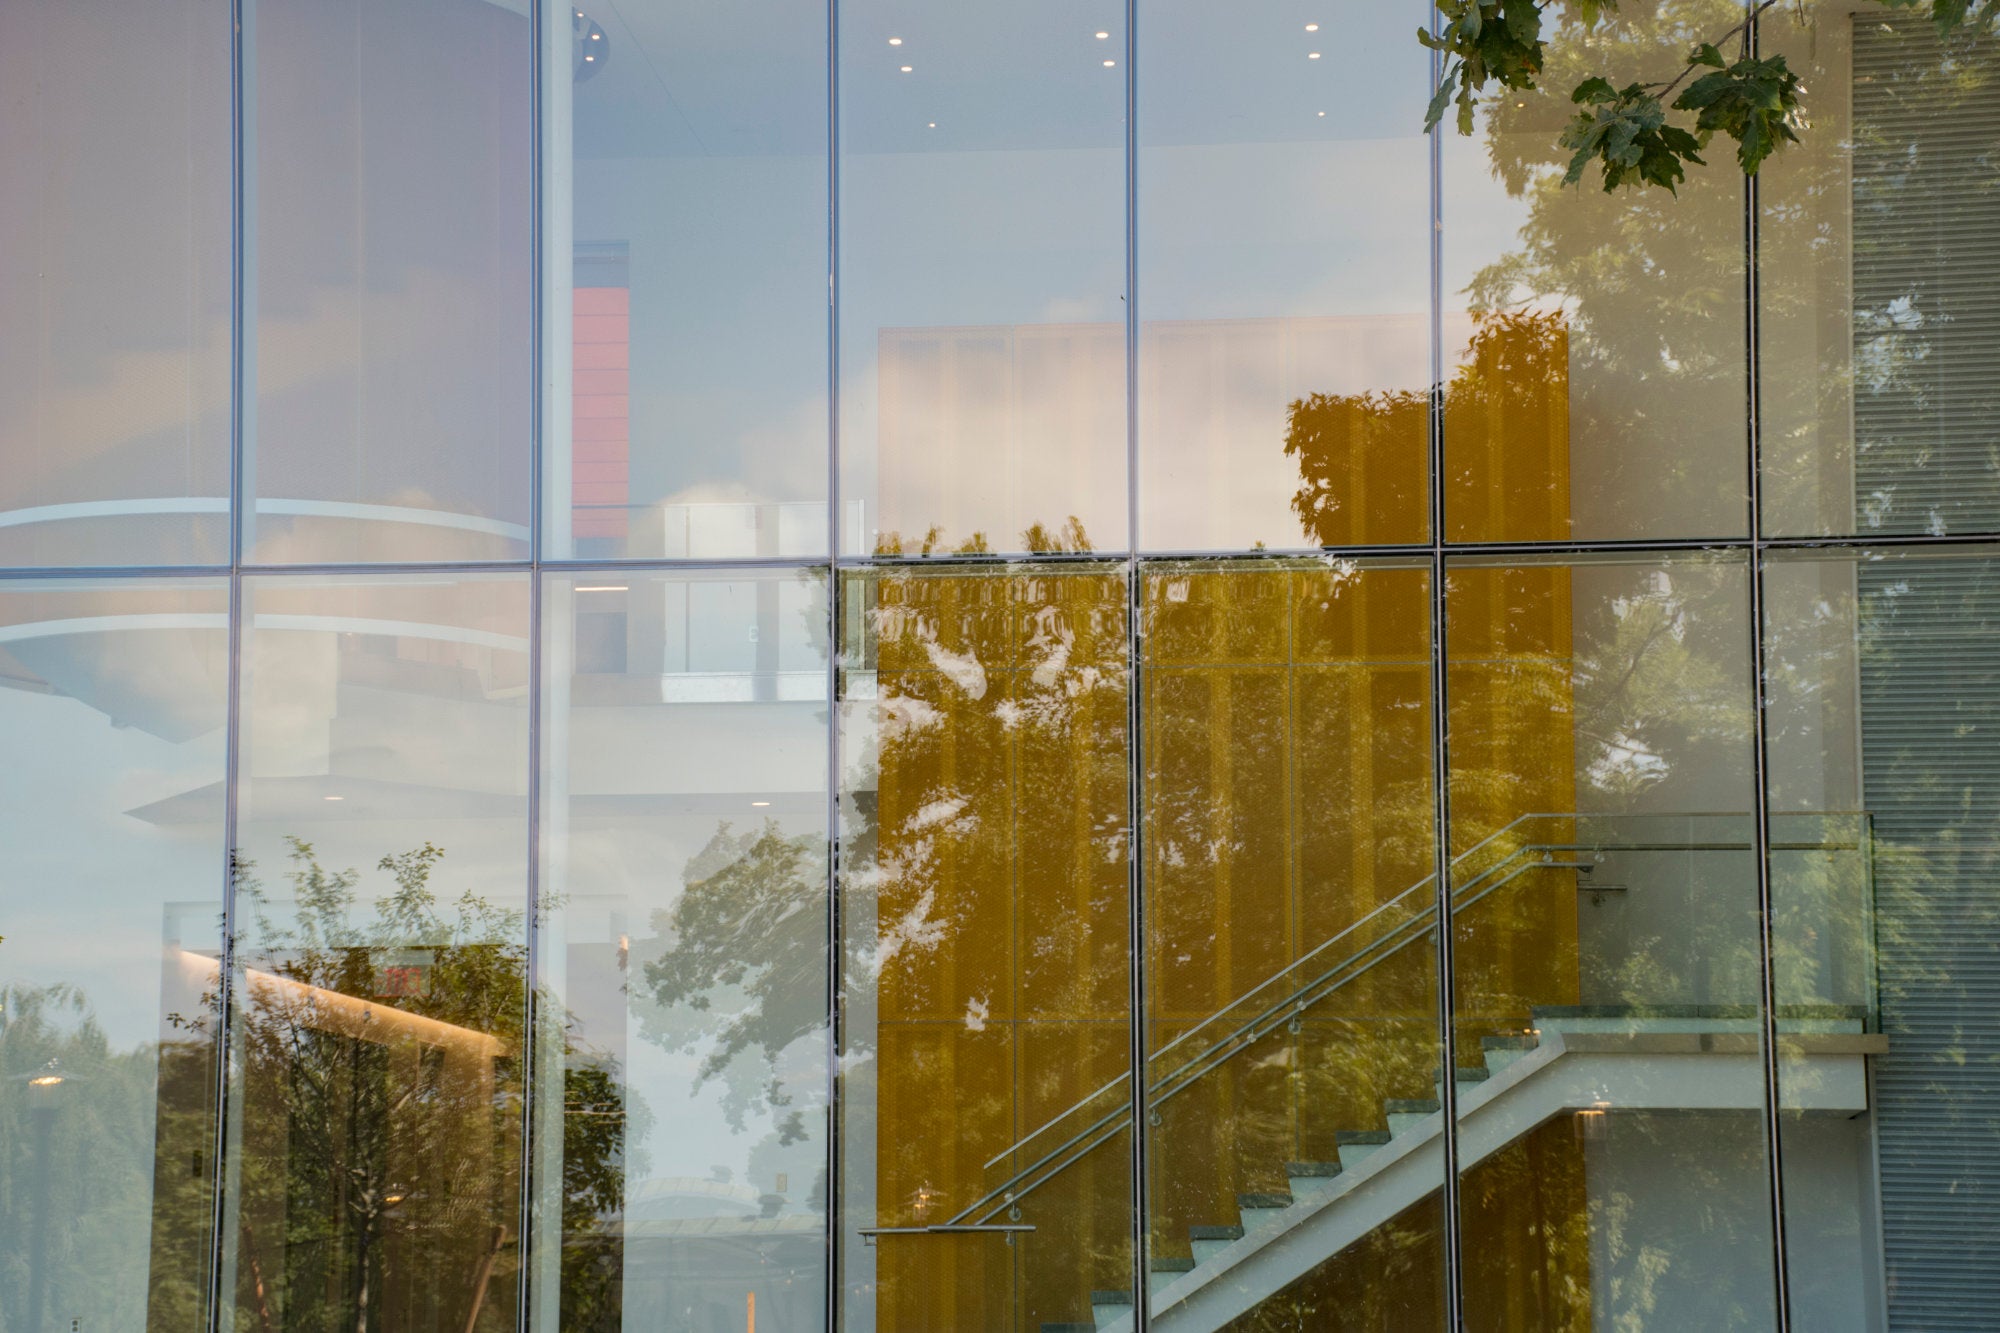 A view of the ground floor corridor with the surrounding landscape reflected in the glass.